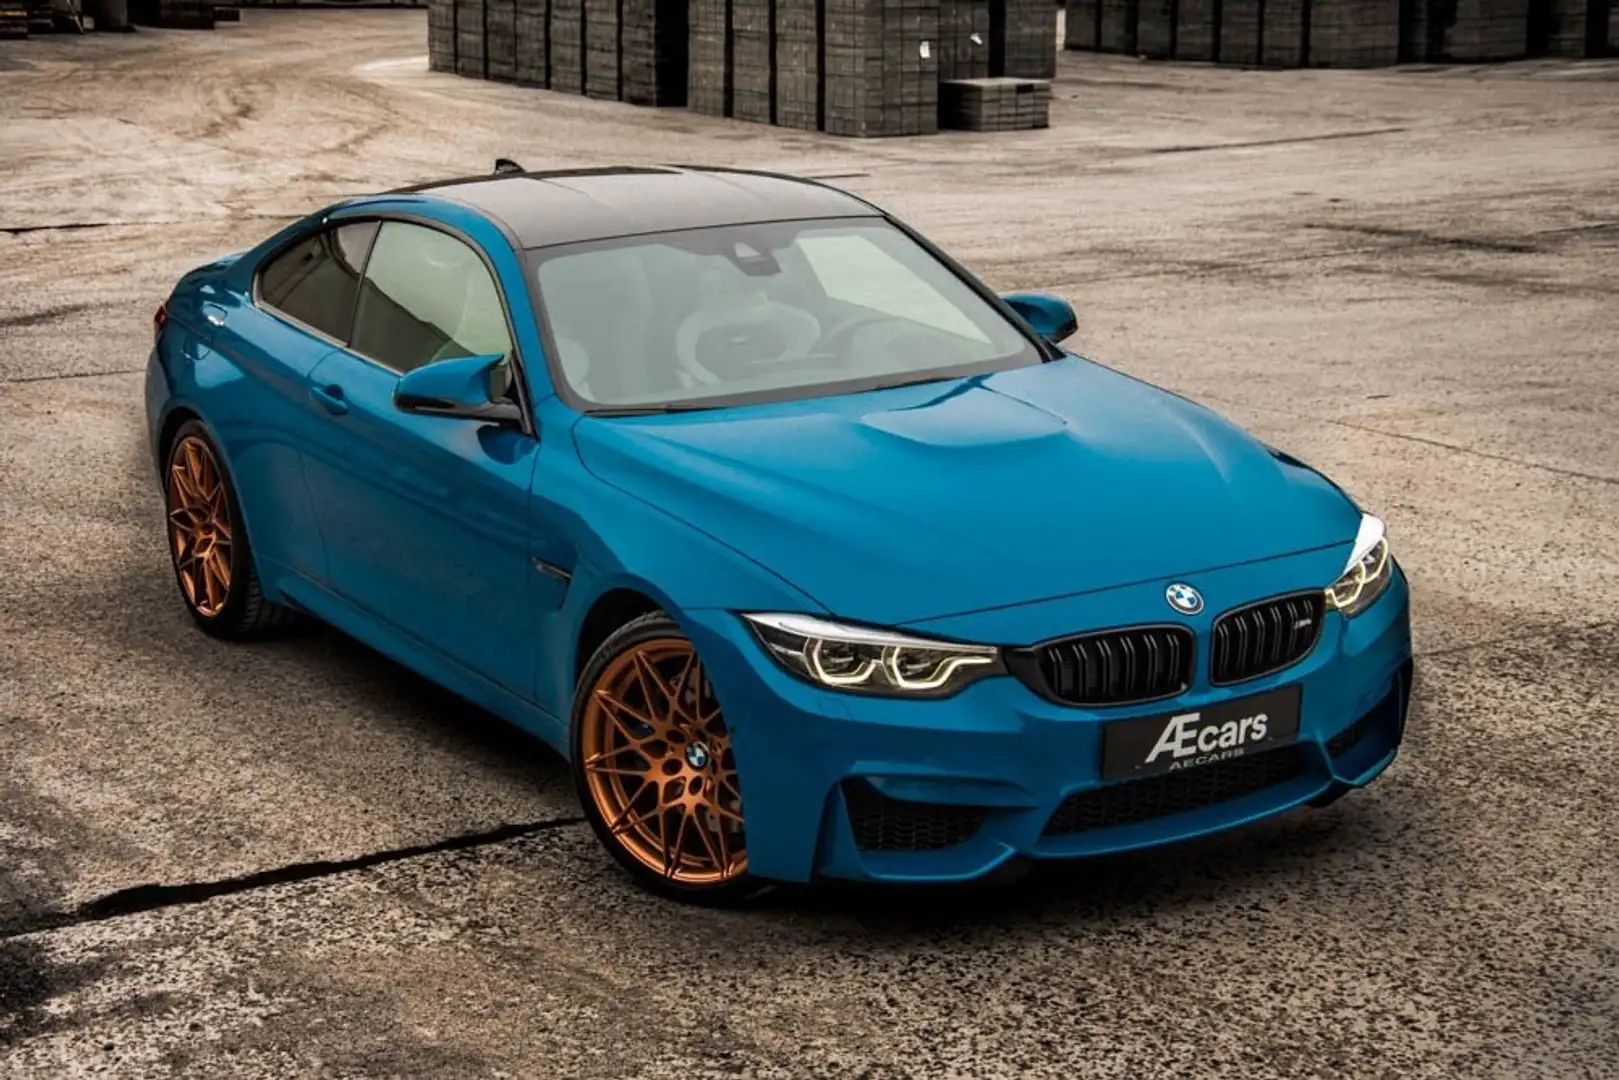 BMW M4 *** COMPETITION HERITAGE / LIMITED 1 OF 750 *** Blue - 2